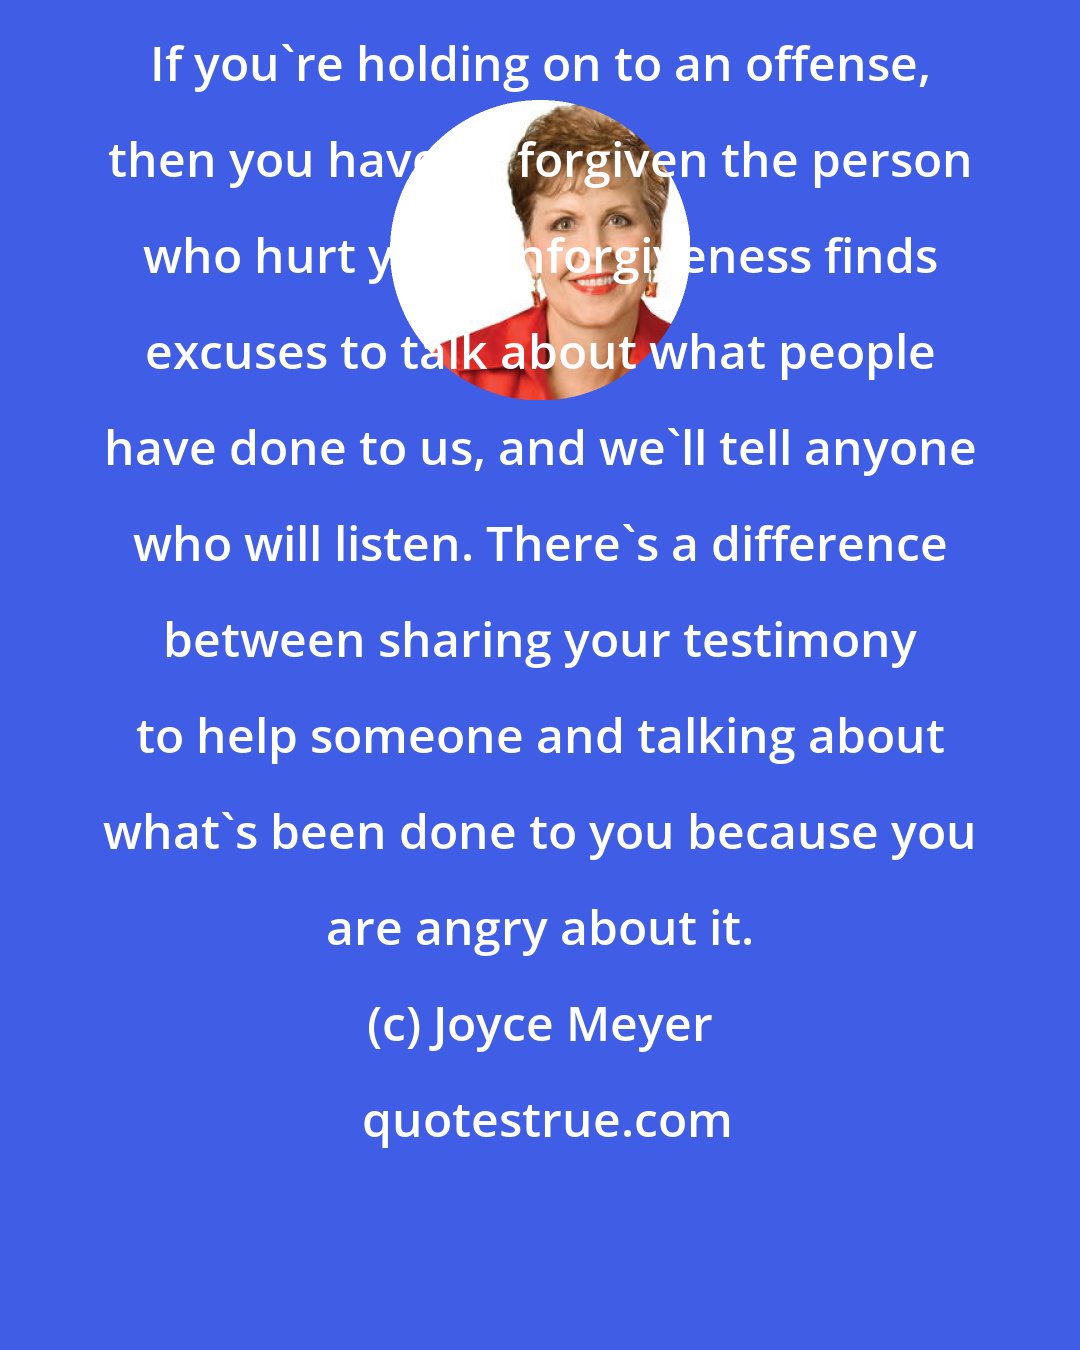 Joyce Meyer: If you're holding on to an offense, then you haven't forgiven the person who hurt you. Unforgiveness finds excuses to talk about what people have done to us, and we'll tell anyone who will listen. There's a difference between sharing your testimony to help someone and talking about what's been done to you because you are angry about it.